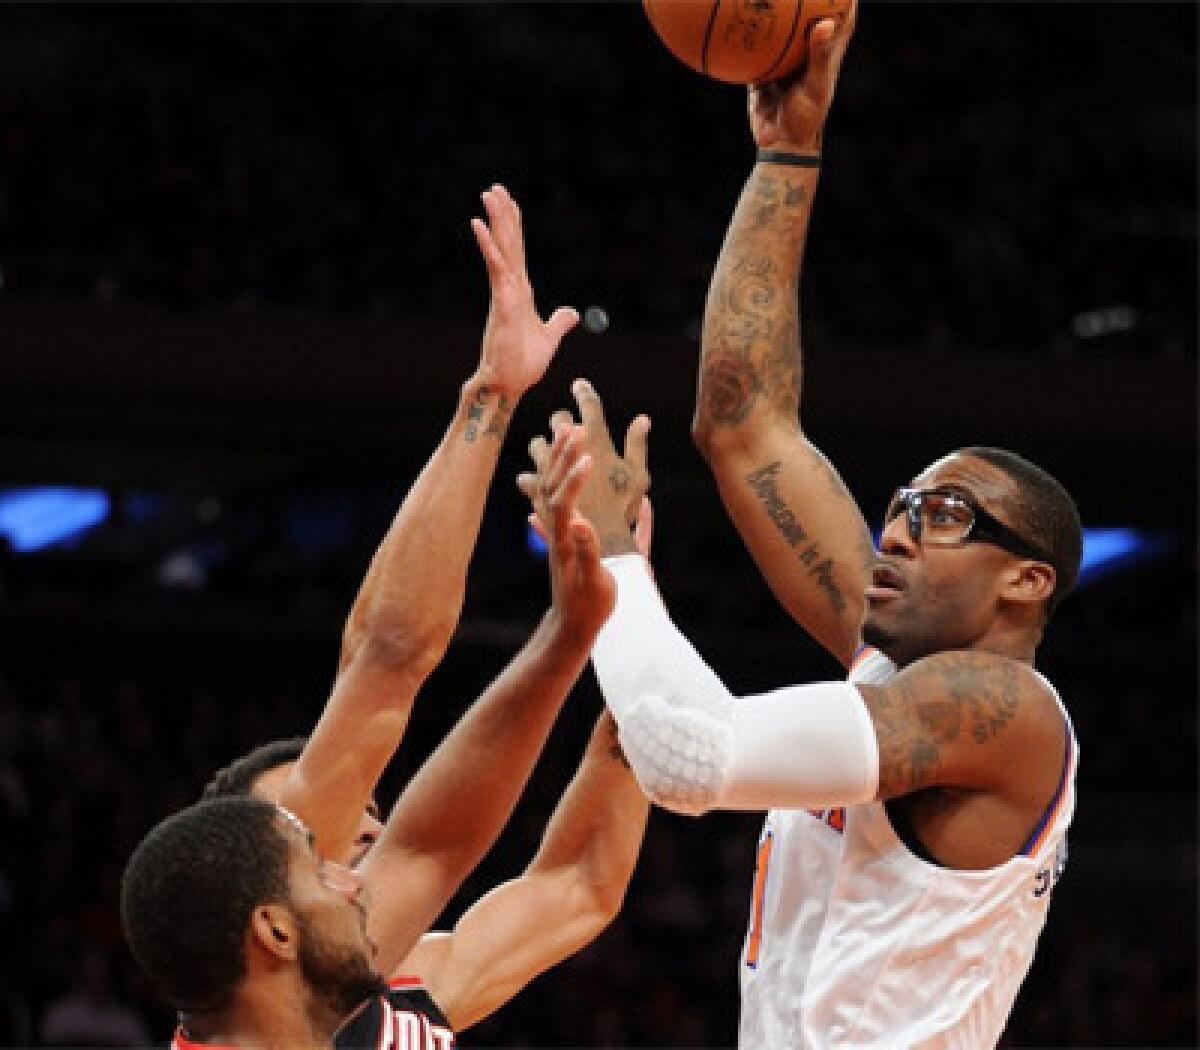 Amare Stoudemire scored six points and had one rebound in his first minutes of the season for the Knicks on Tuesday.